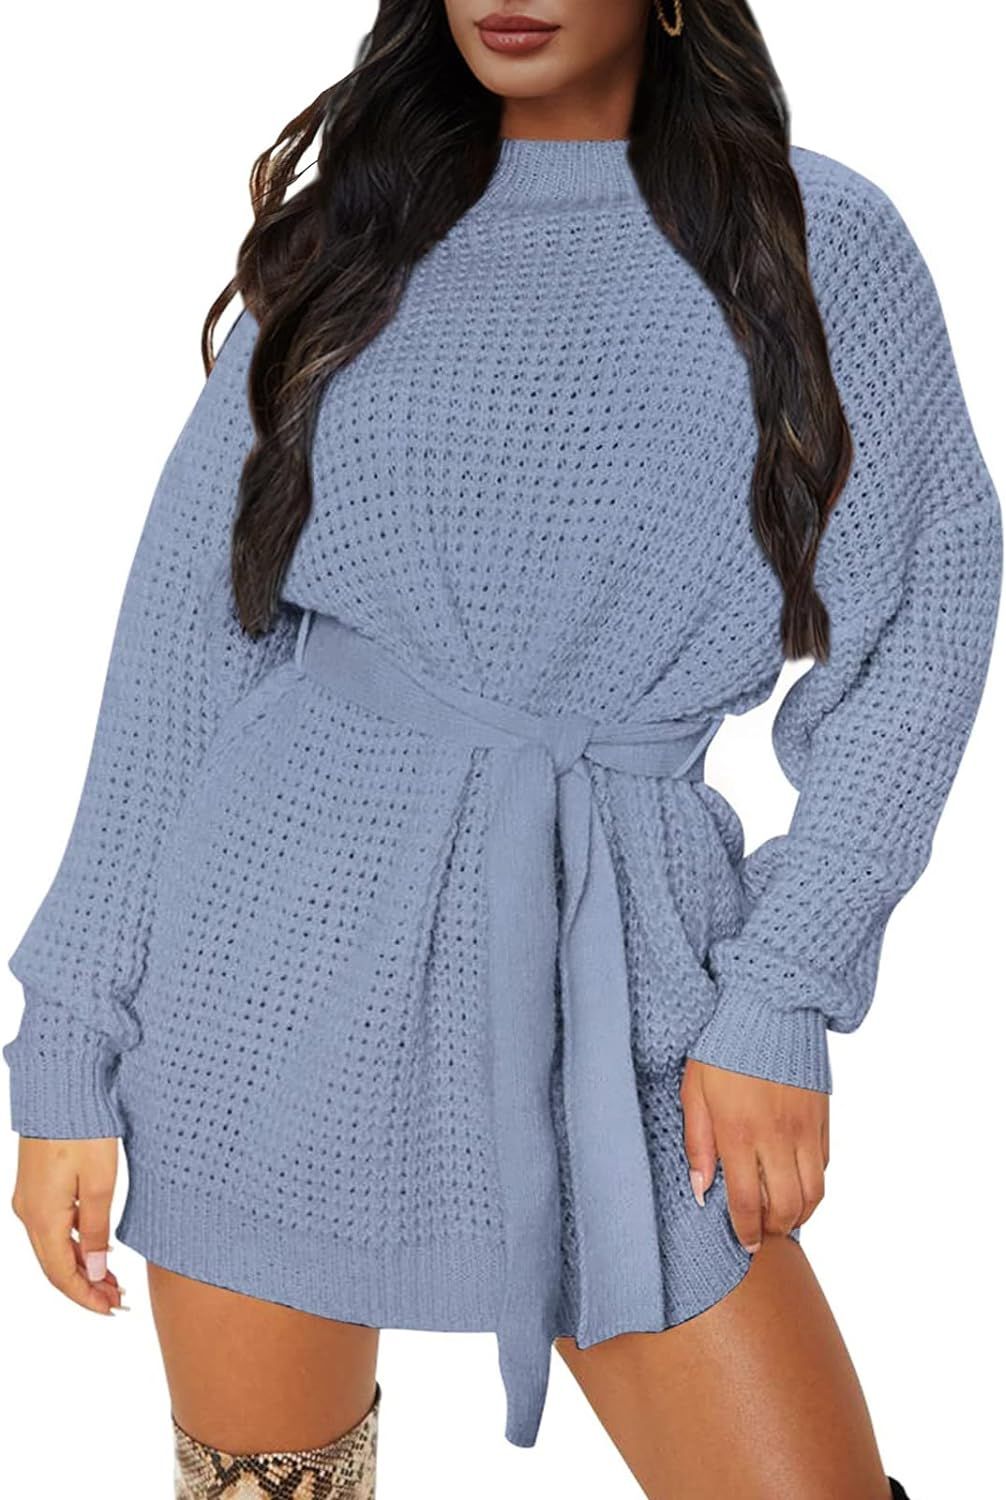 ZESICA Women's Long Sleeve Solid Color Waffle Knitted Tie Wasit Tunic Pullover Sweater Dress | Amazon (US)